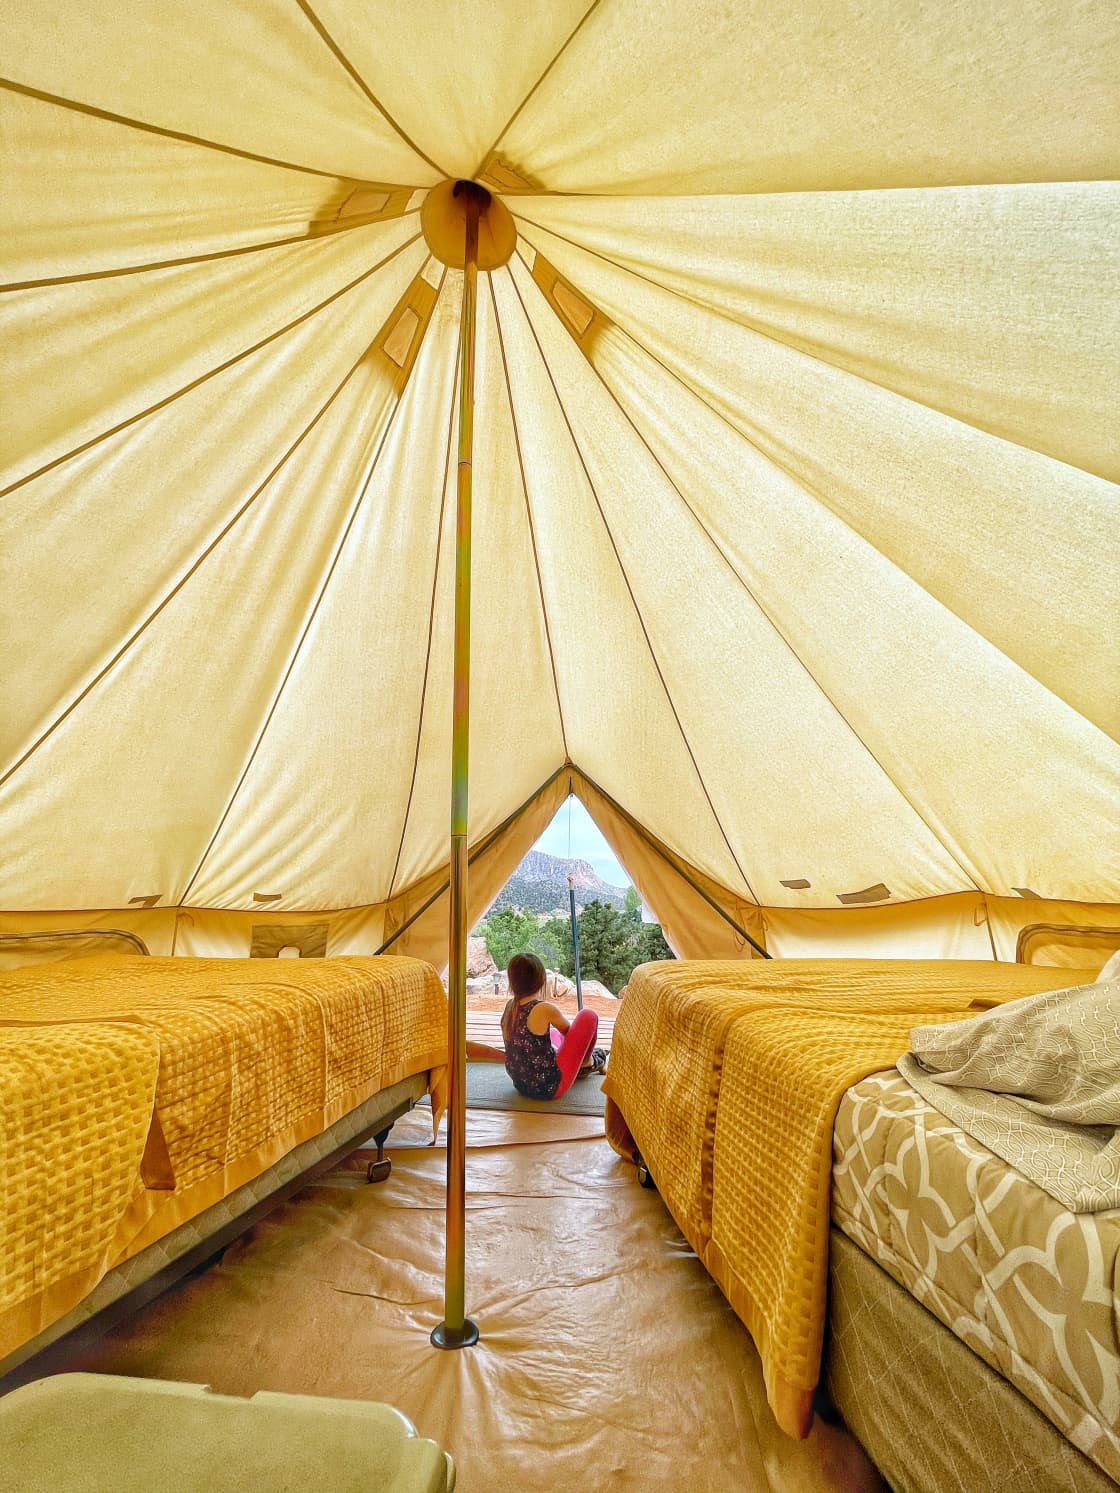 We have cozy tents perfect for your family. Each tent has access to electricity, AC, Heater, and WiFi!